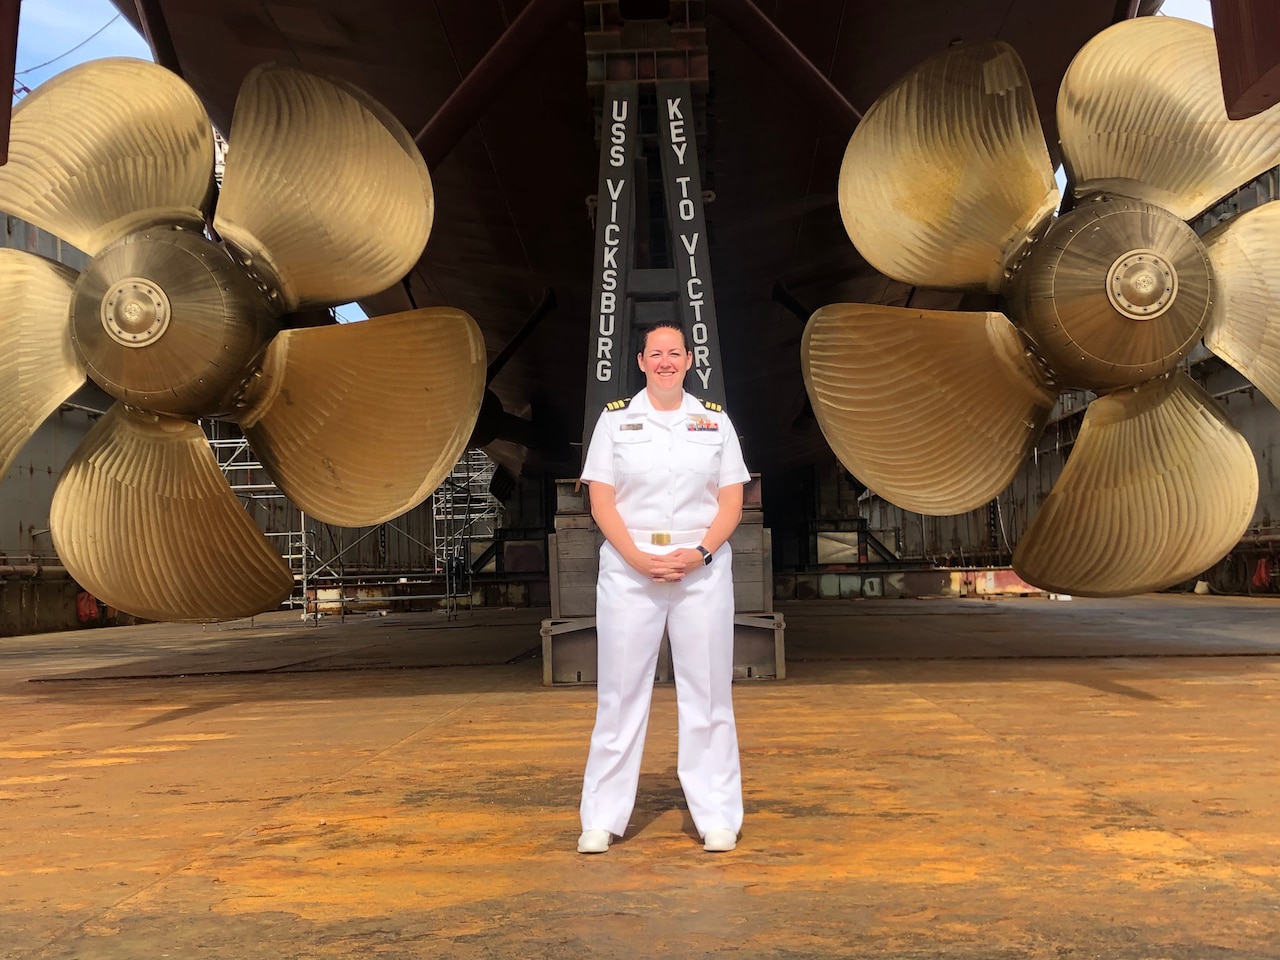 A sailor in dress-white uniform stands in a dry dock in front of a large ship’s propellers.